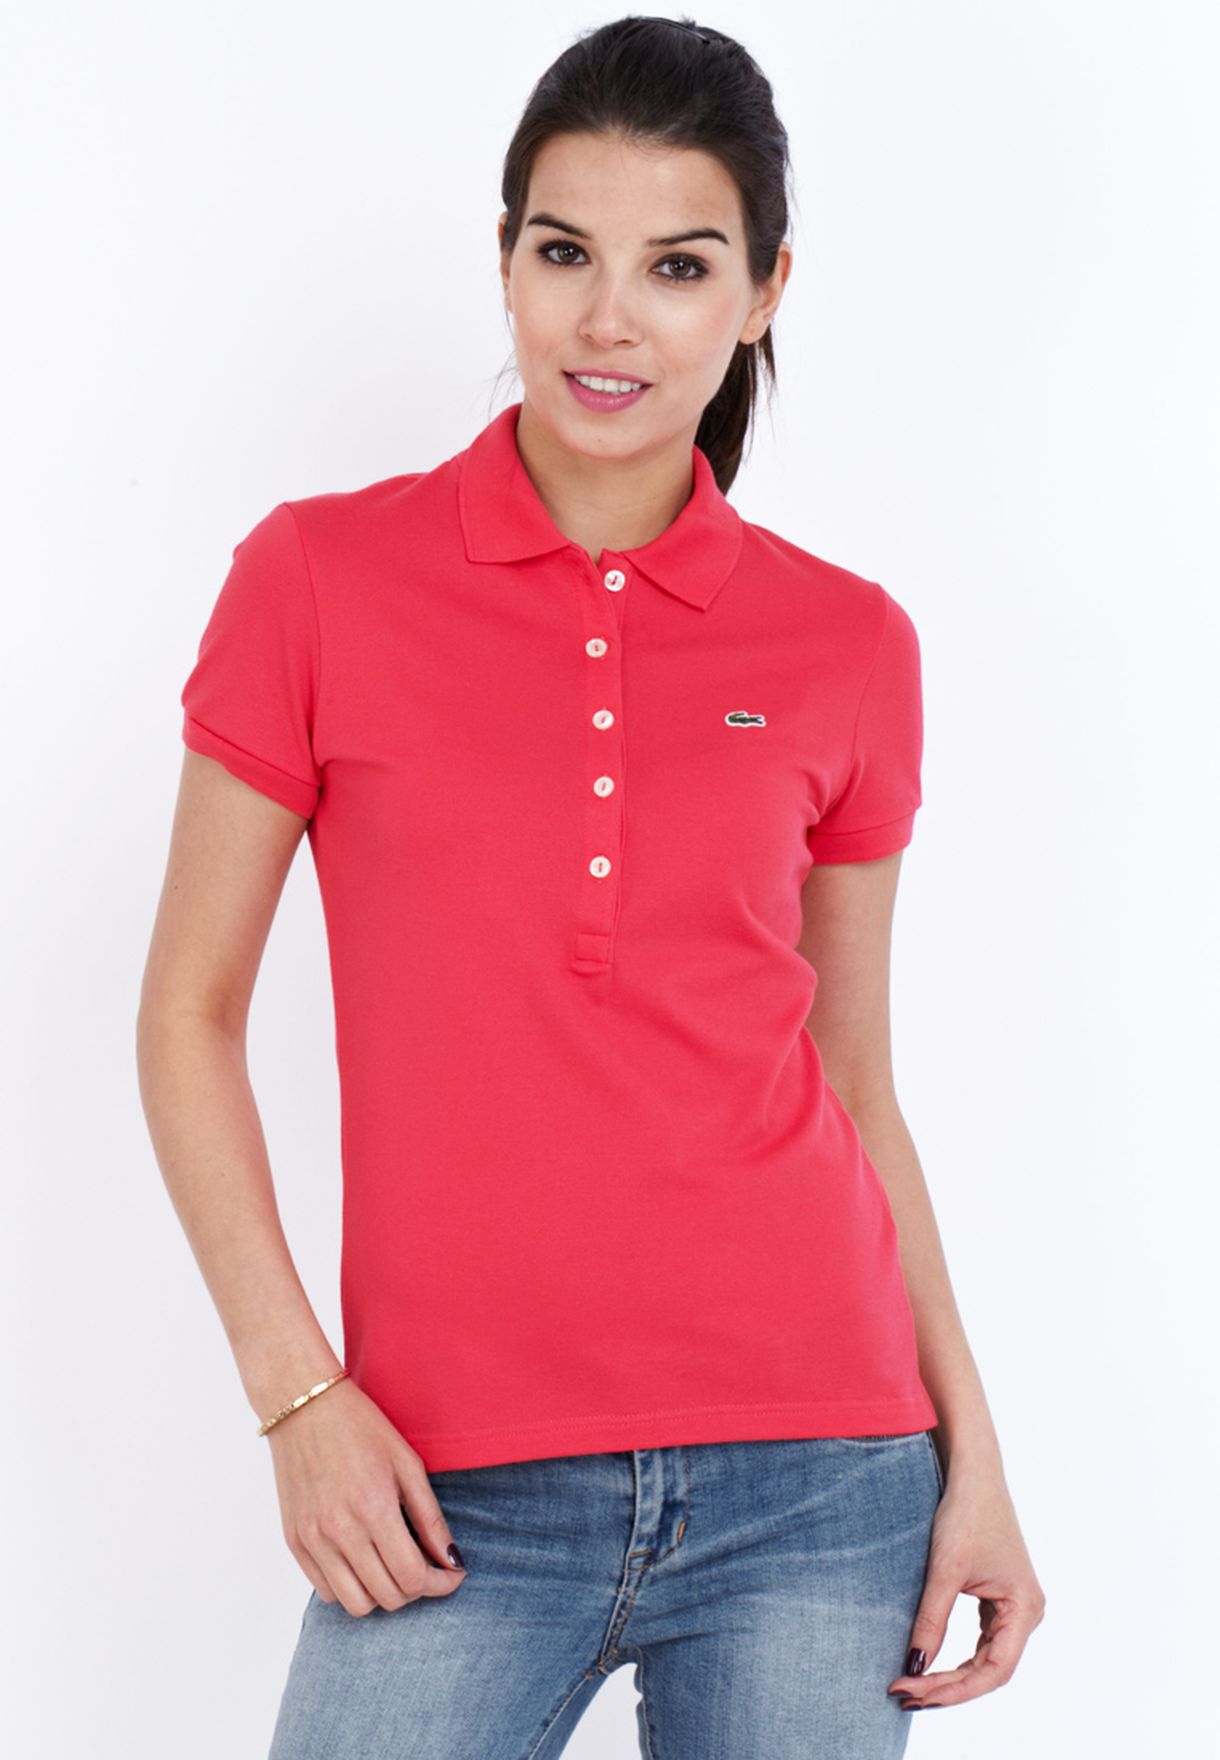 womens pink lacoste polo shirt